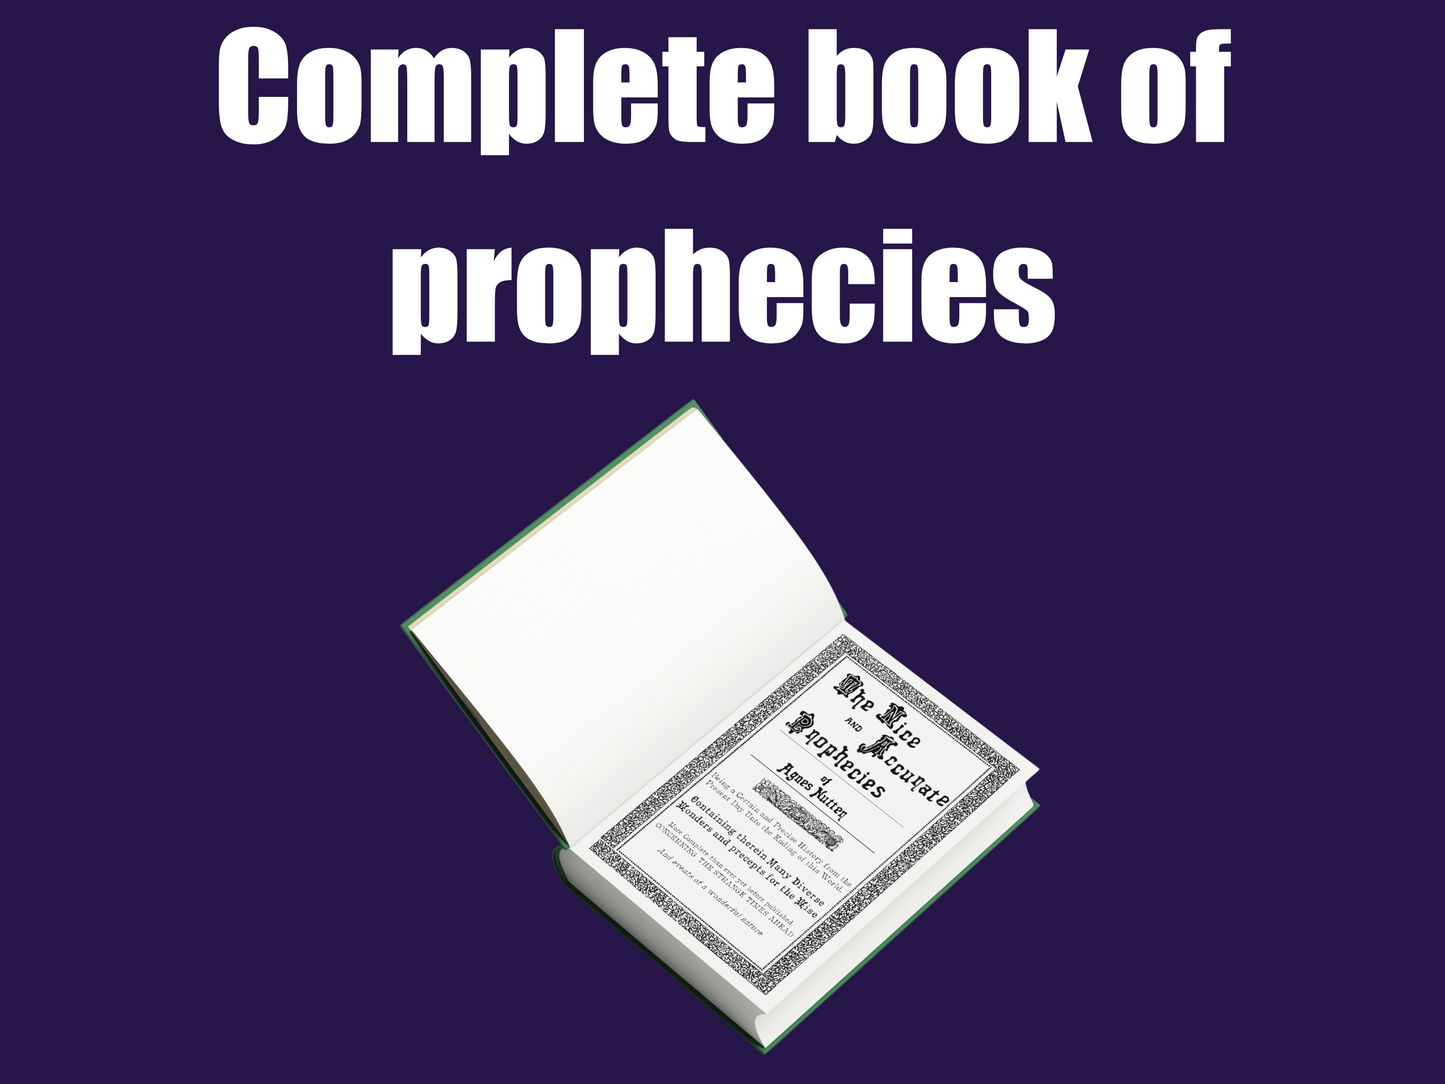 The Nice and Accurate Prophecies of Agnes Nutter Hardcover Book